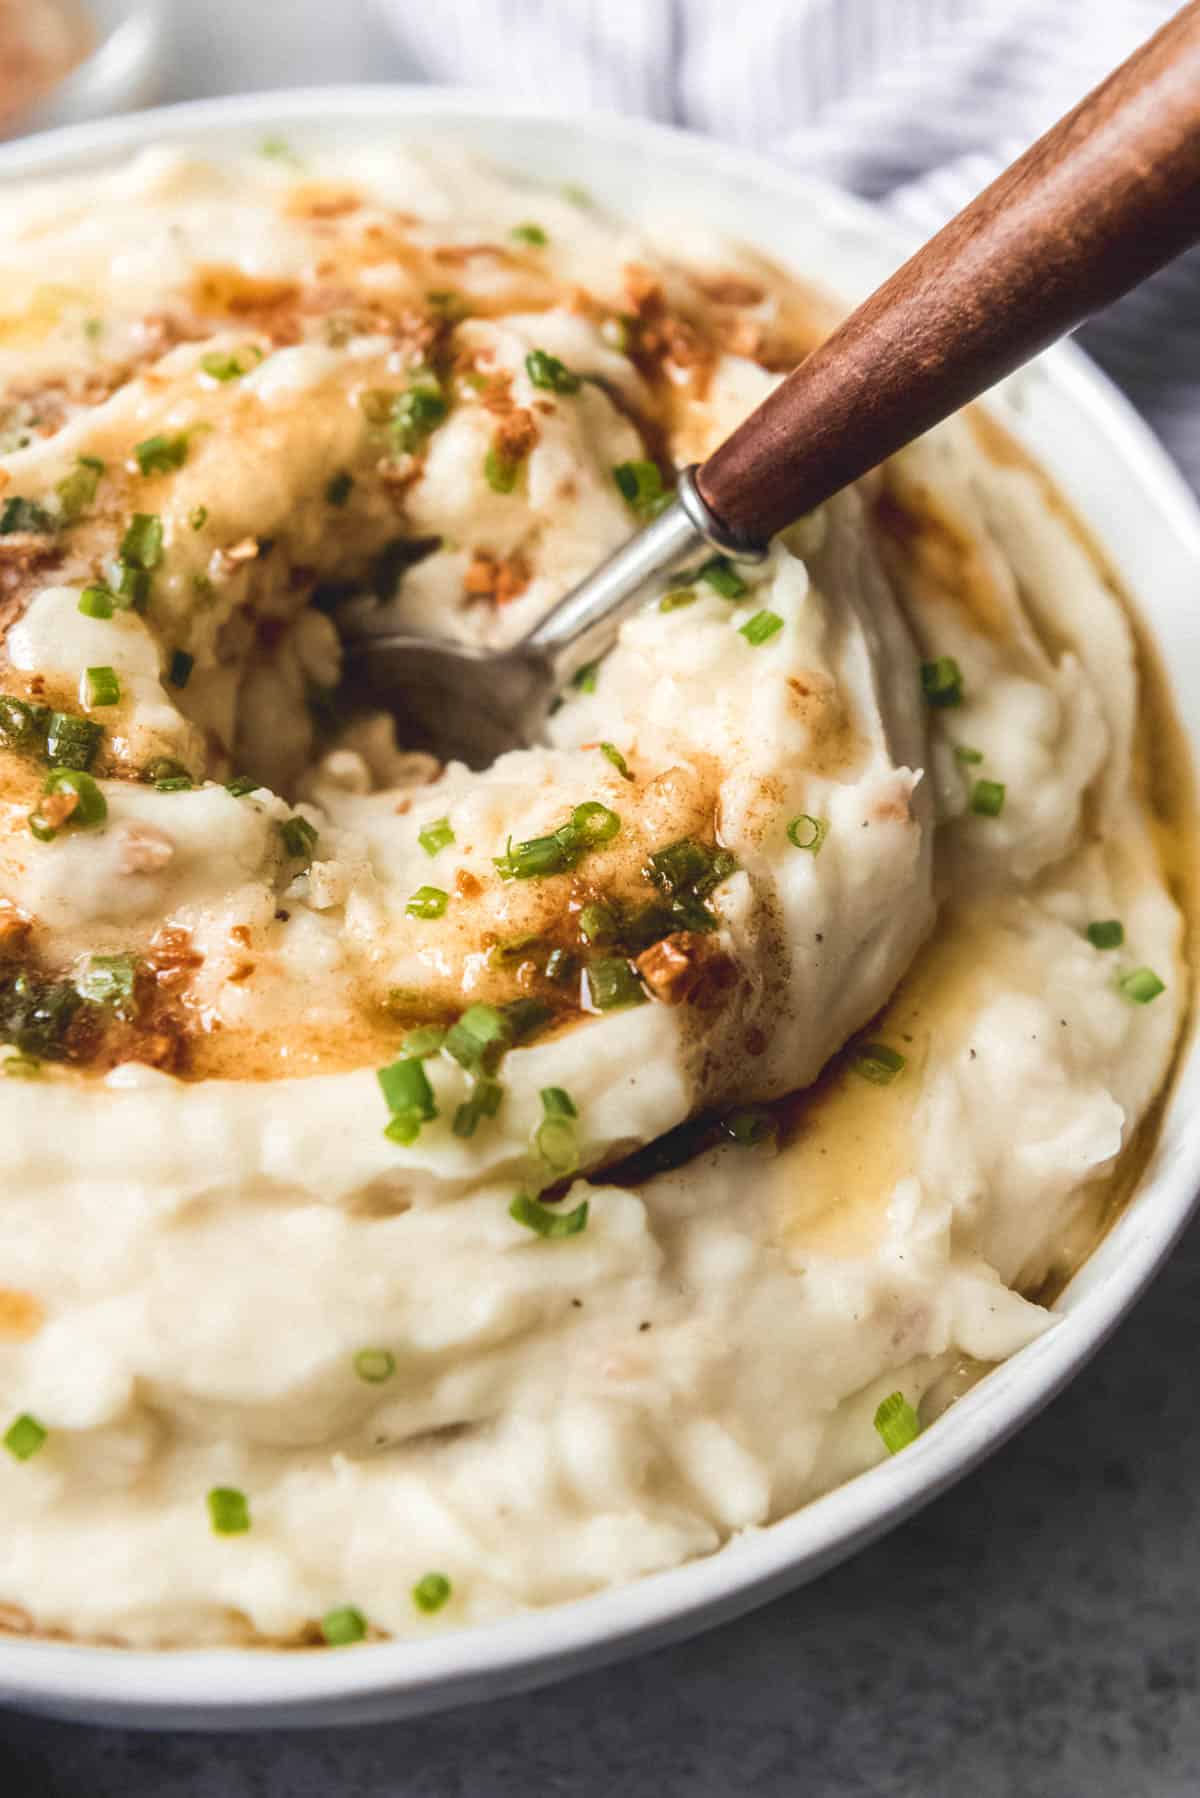 A close-up image of mashed potatoes topped with brown butter sauce and chopped chives.